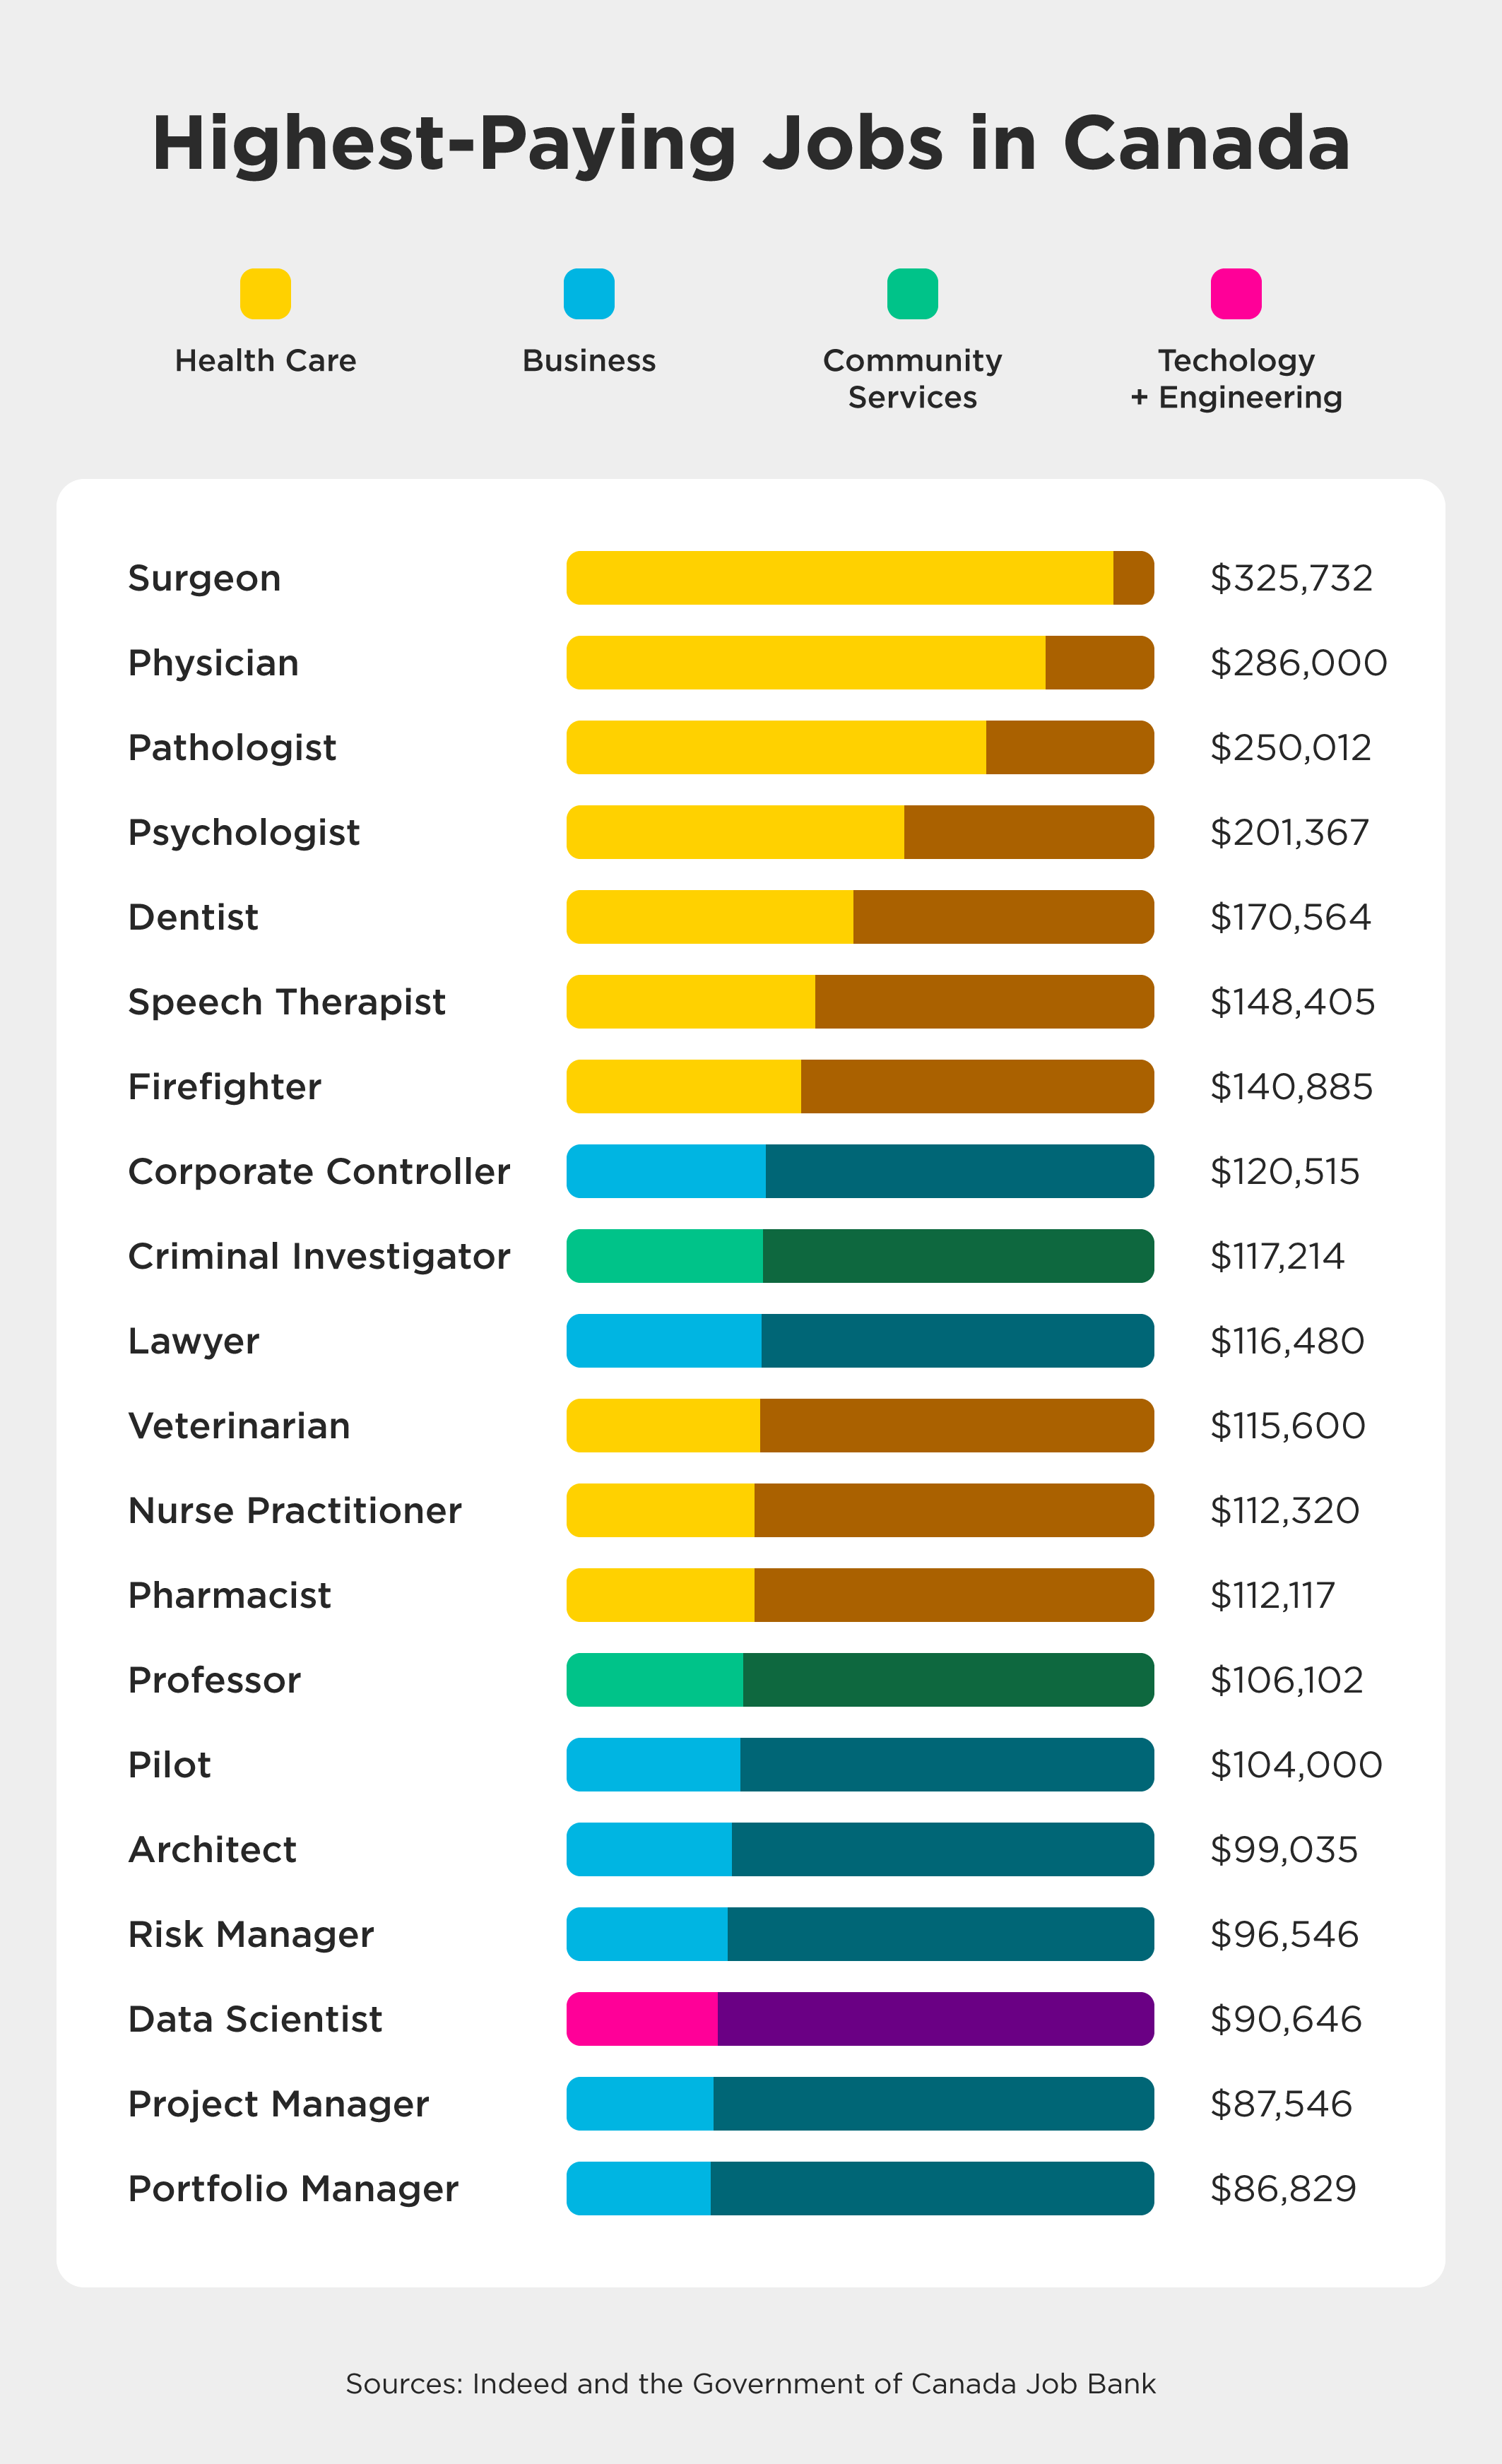 An illustrated bar graph lists the top 20 highest-paying jobs in Canada with the average salary.